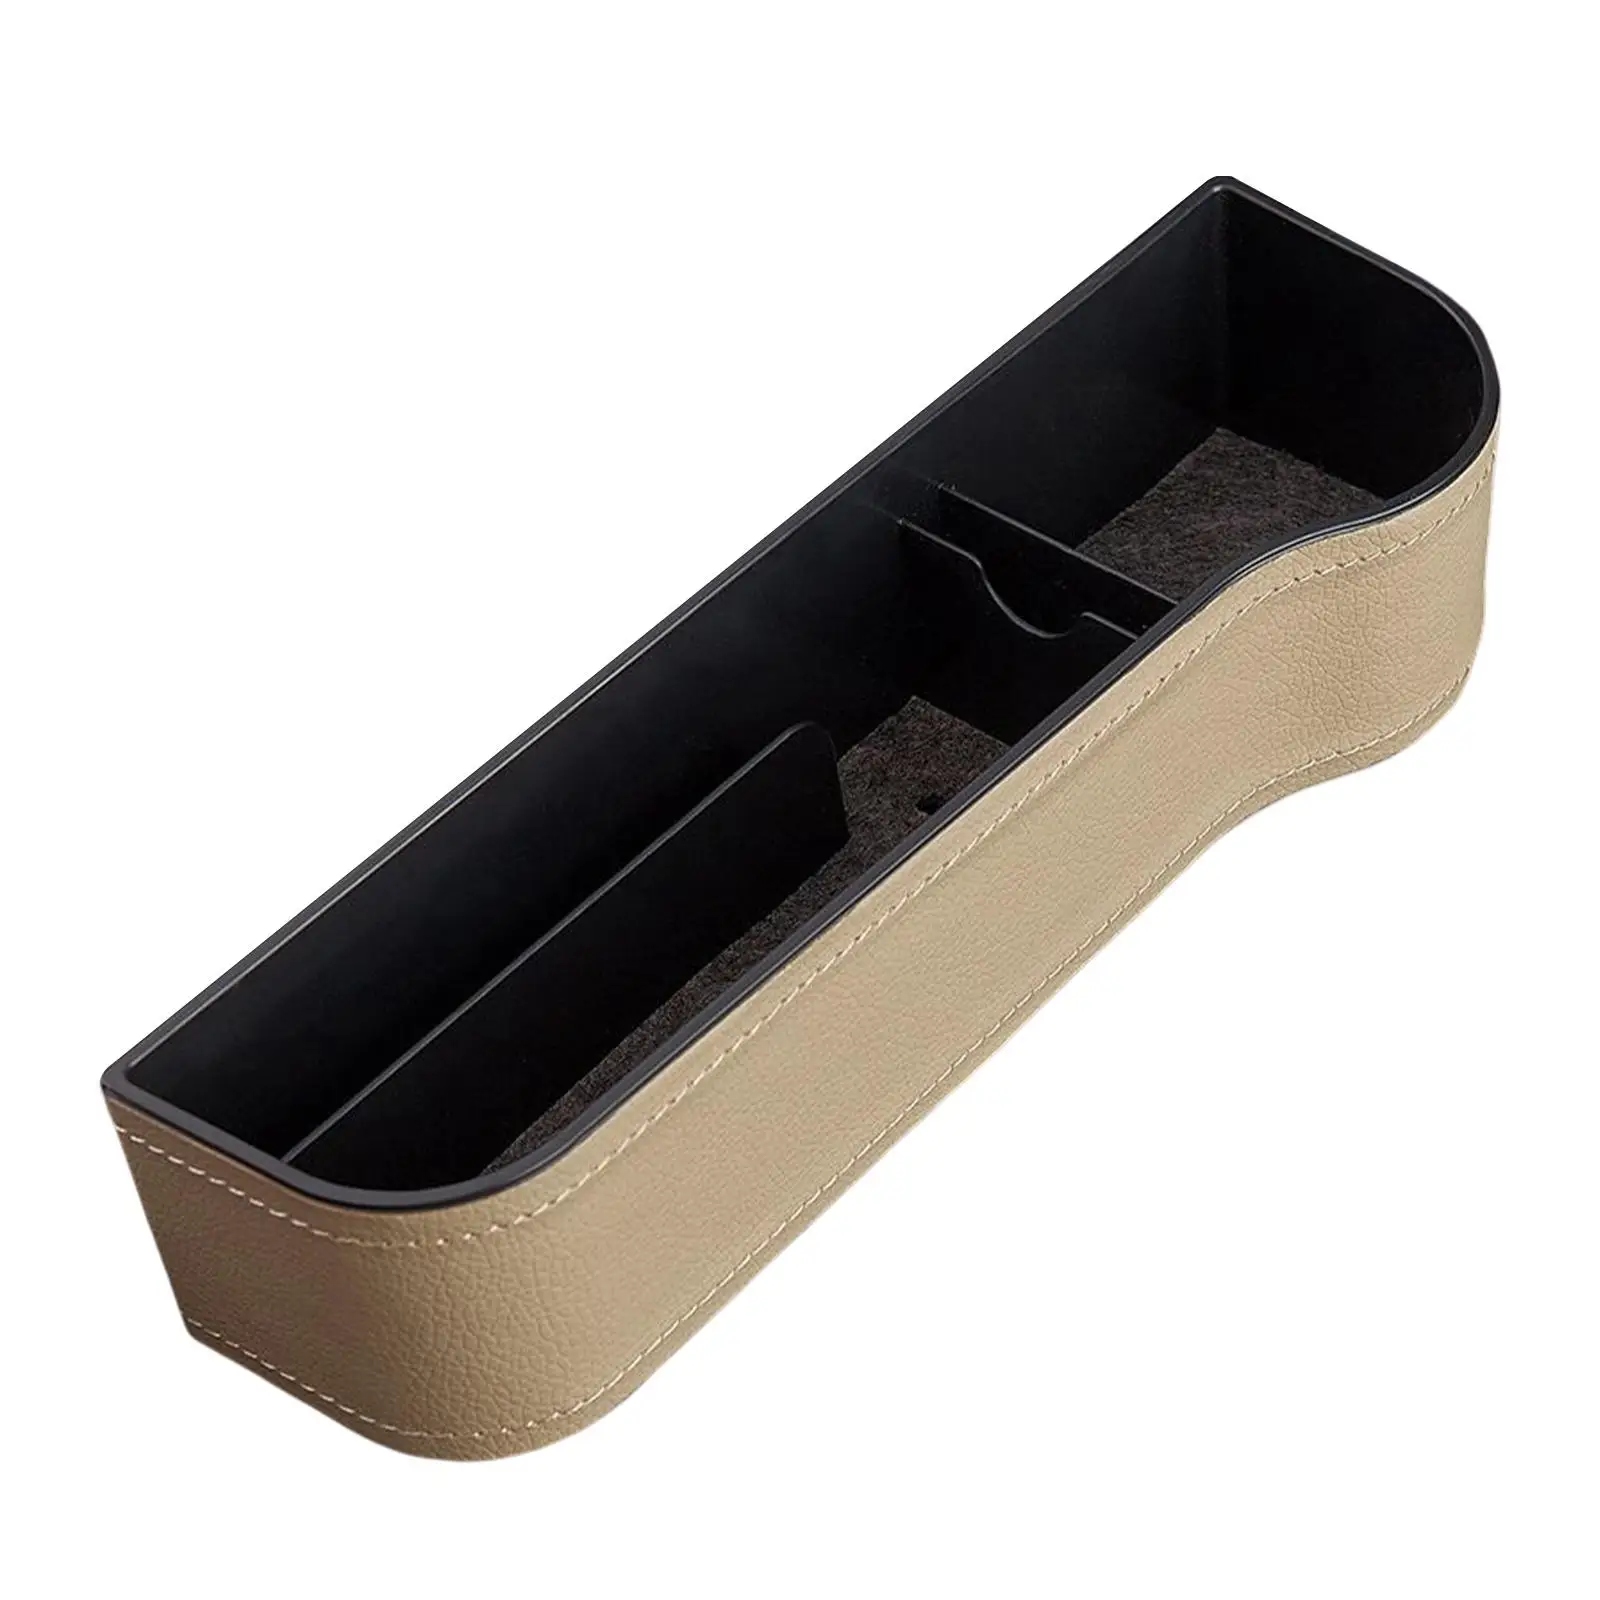 Car Seat Gap Filler PU Leather Auto Console Side Storage Box for Phones